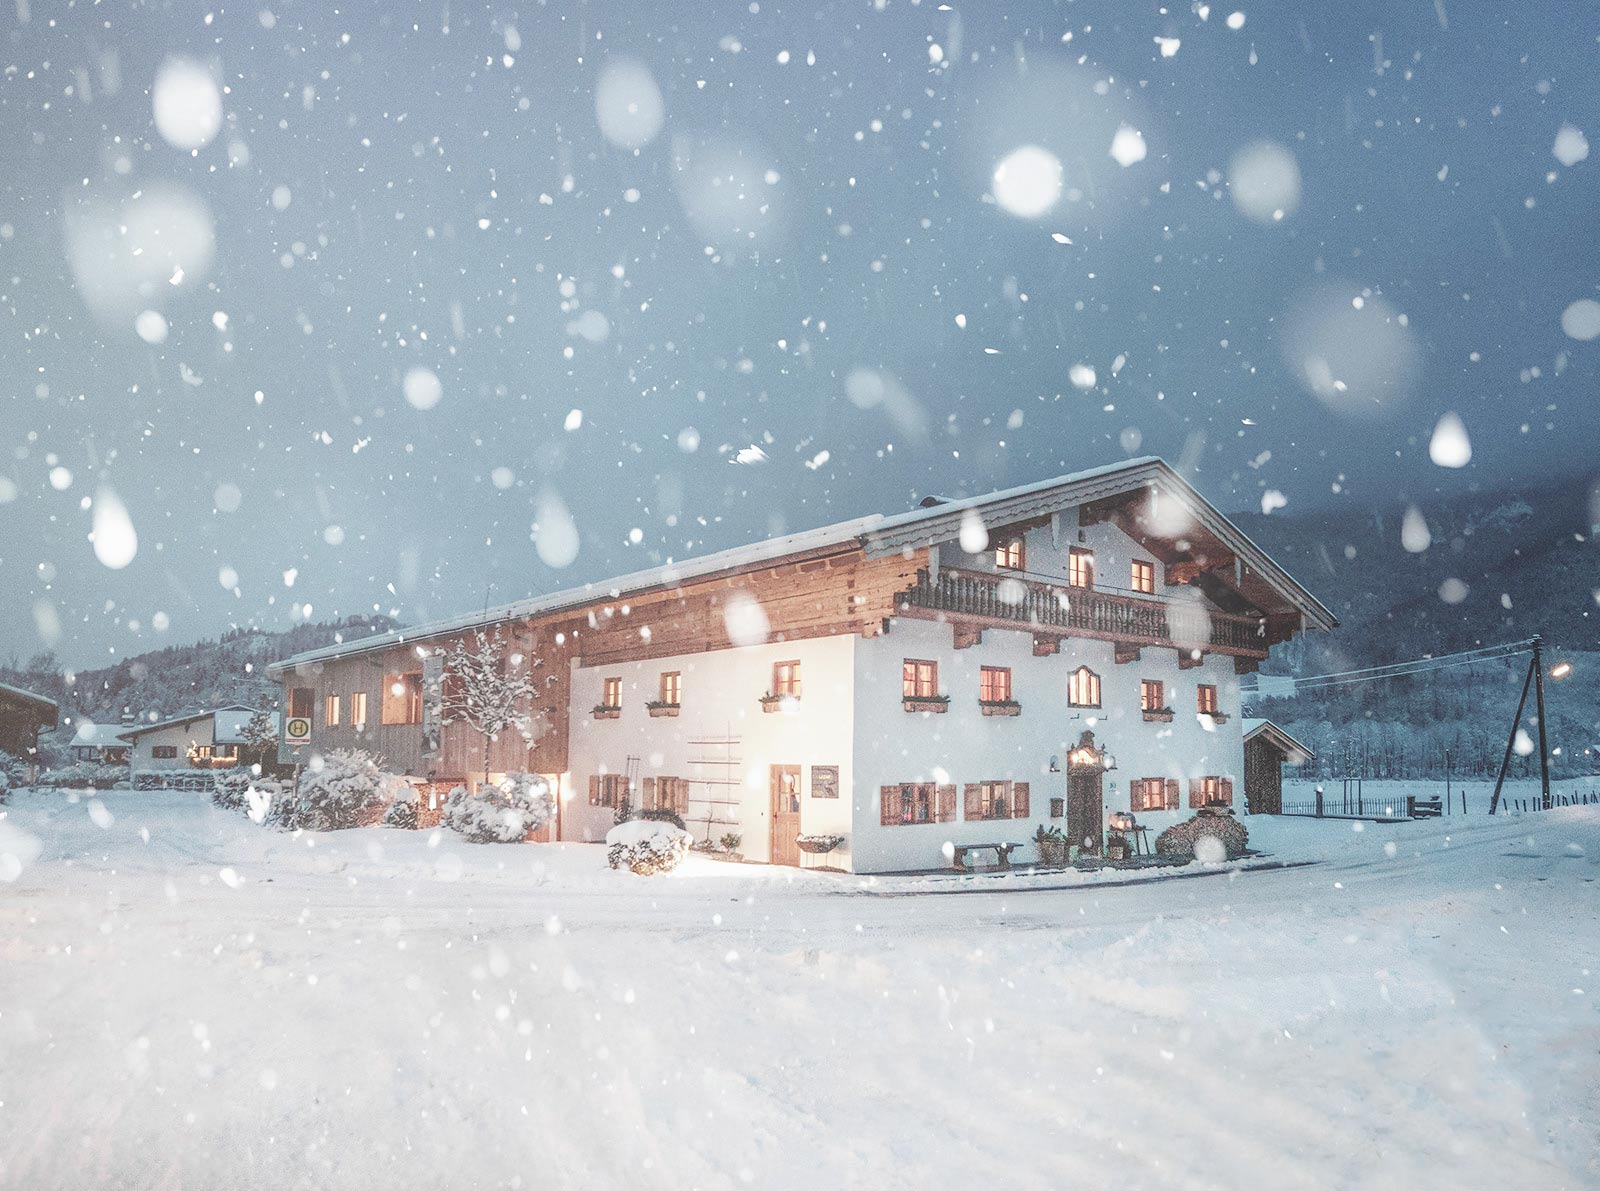 Pretty Hotels: Where to Stay in Your Ski Holidays (Image 19)